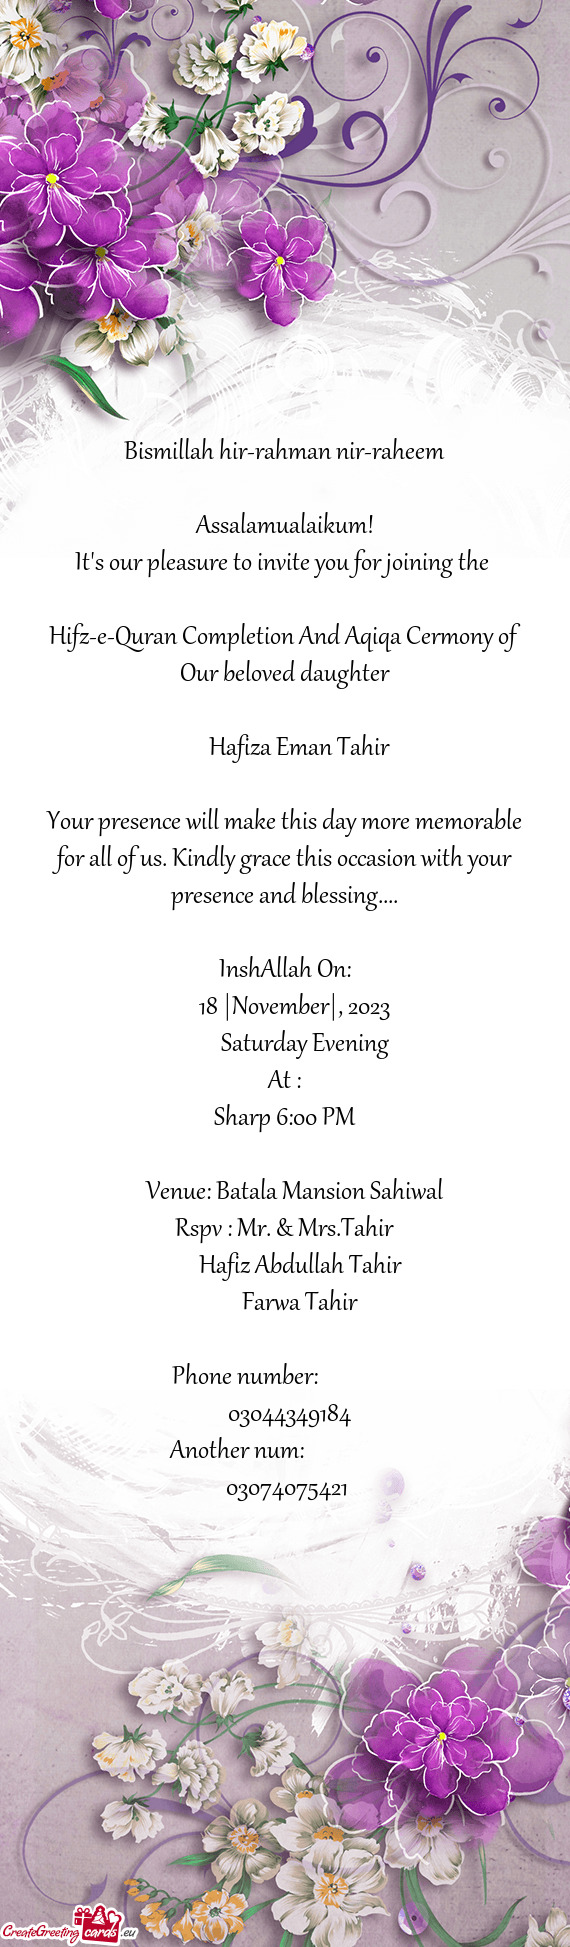 Hifz-e-Quran Completion And Aqiqa Cermony of Our beloved daughter